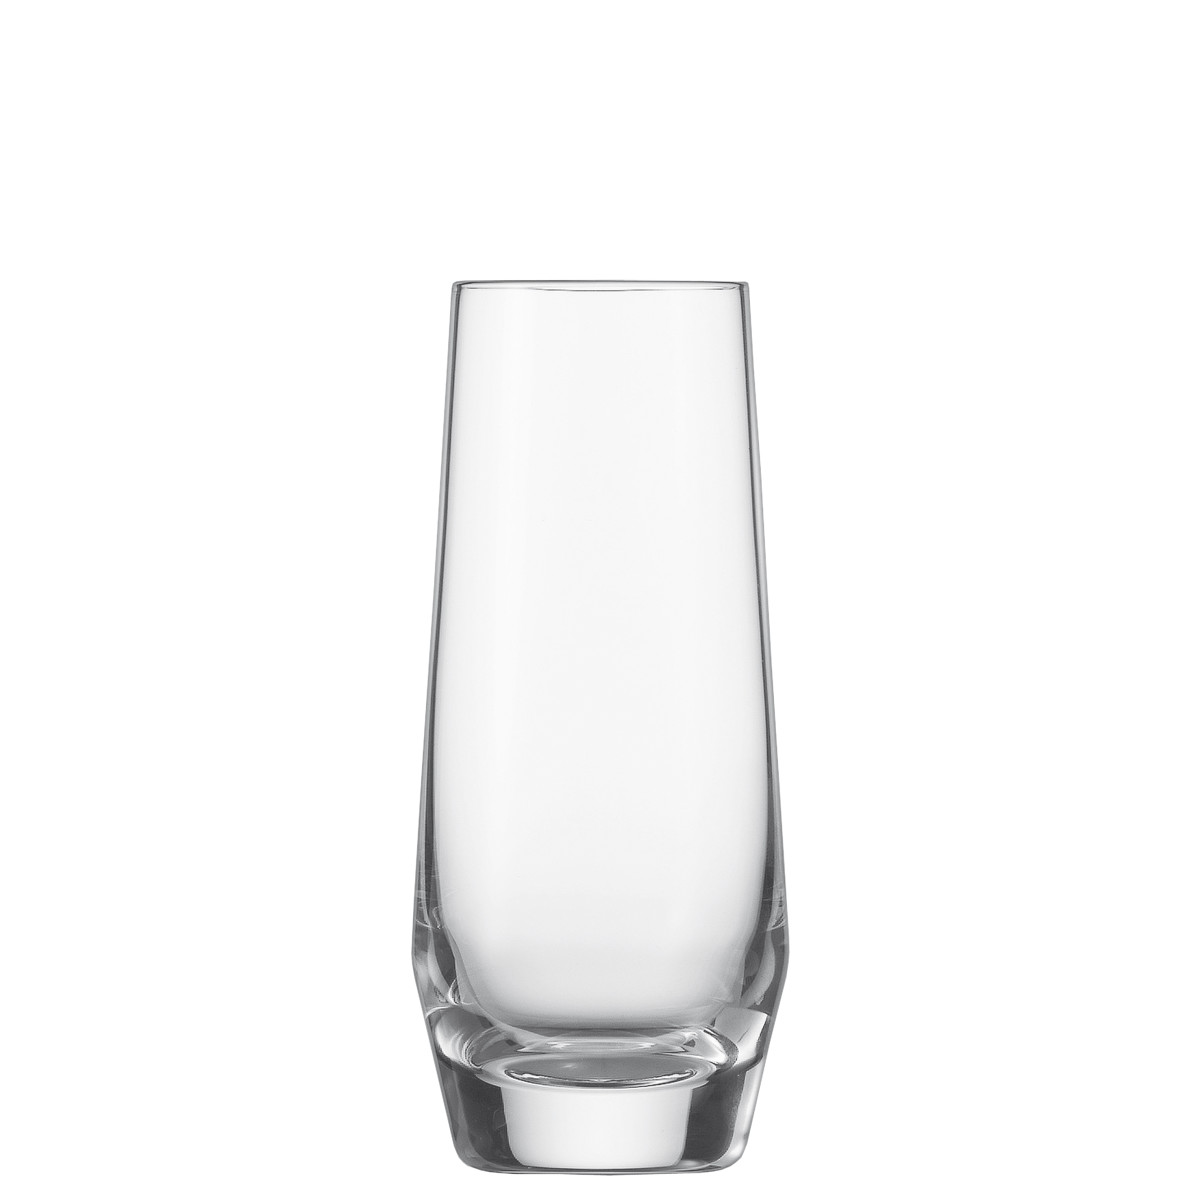 Zwiesel Glas Pure Stemless Flute, Set of 6